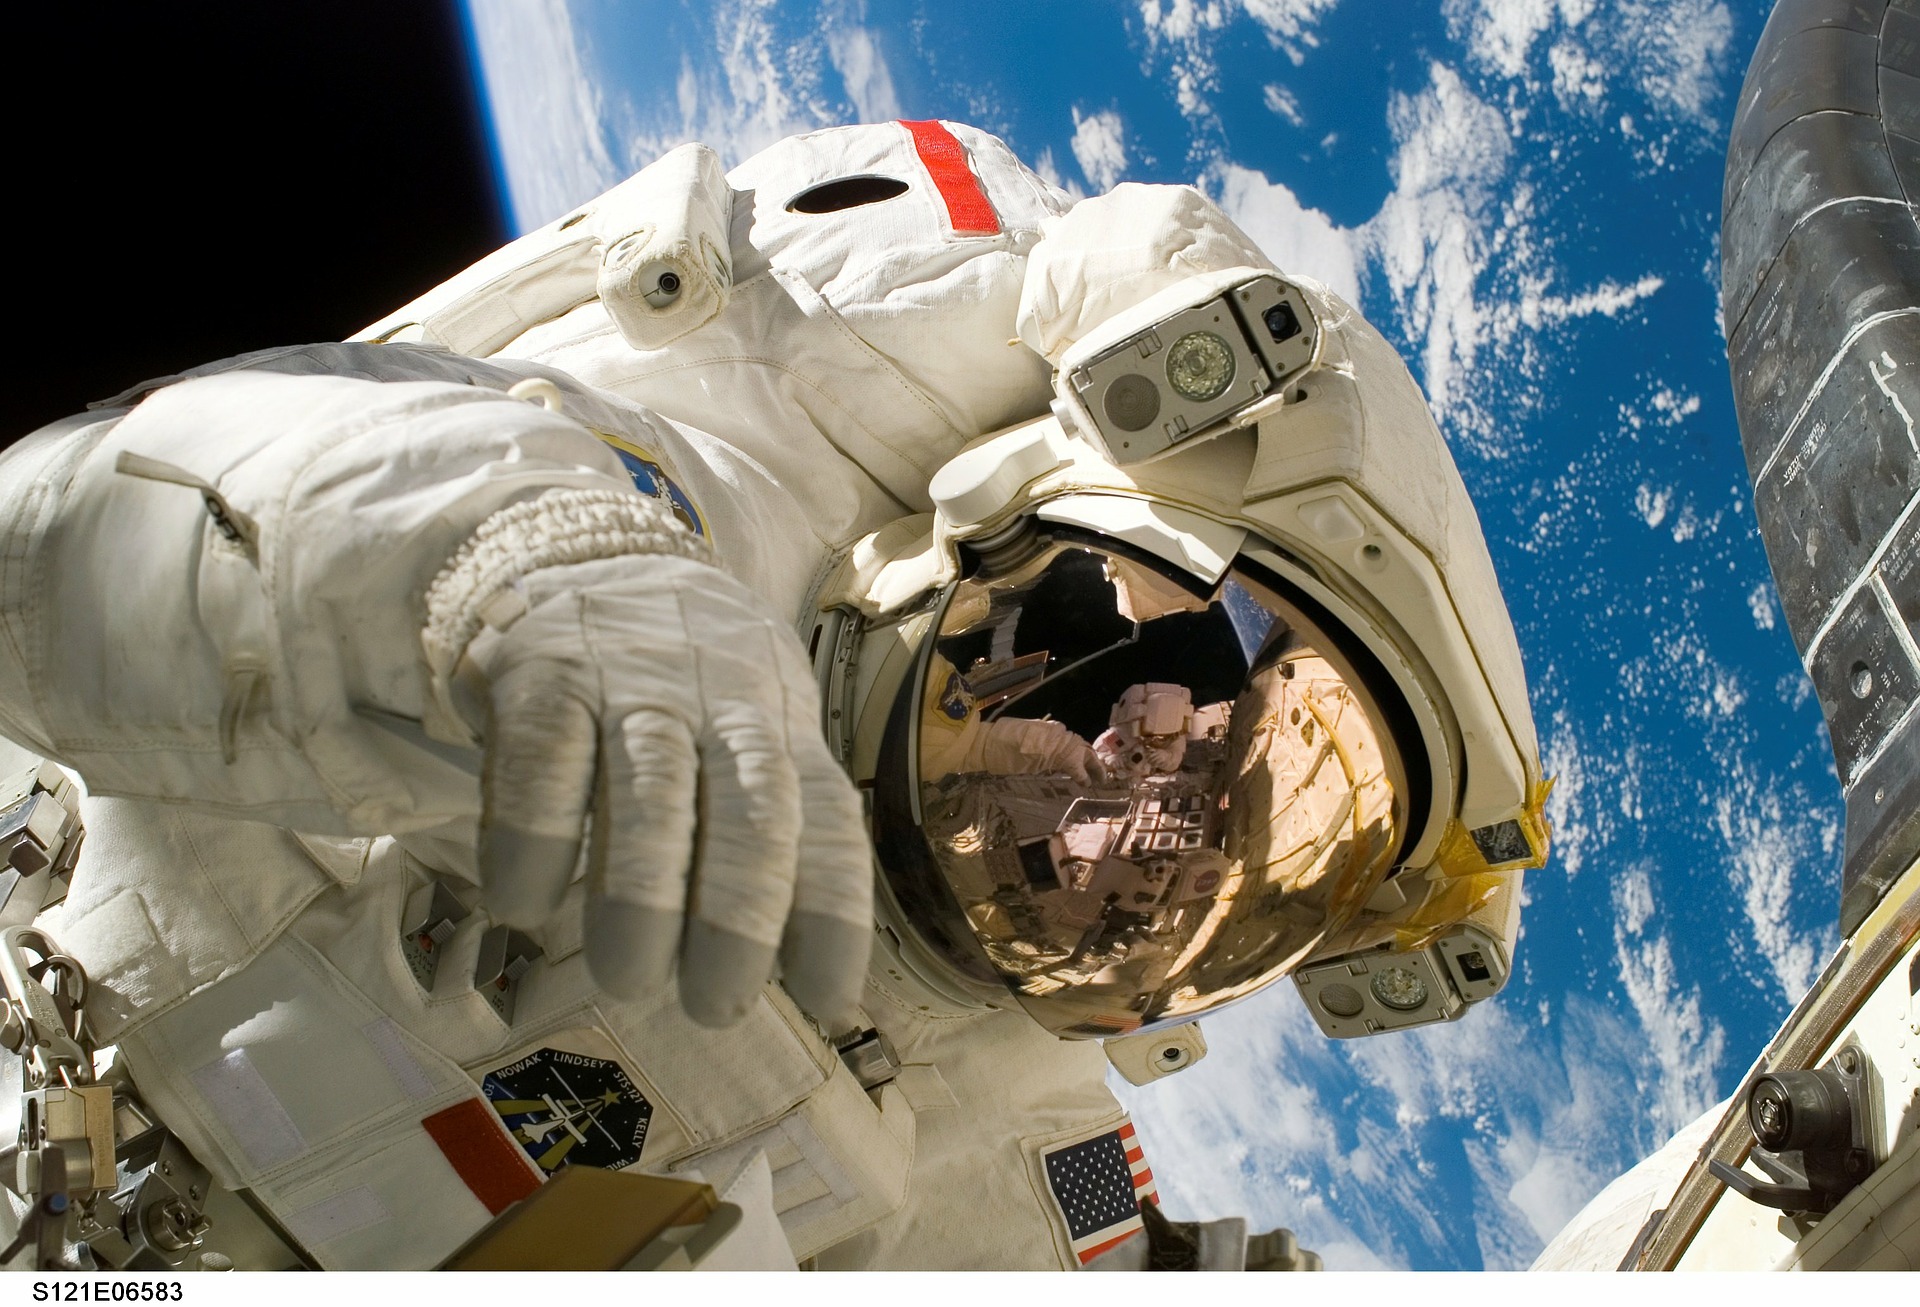 Spaceflight Could Increase Risk of Cancer and Heart Disease in Astronauts